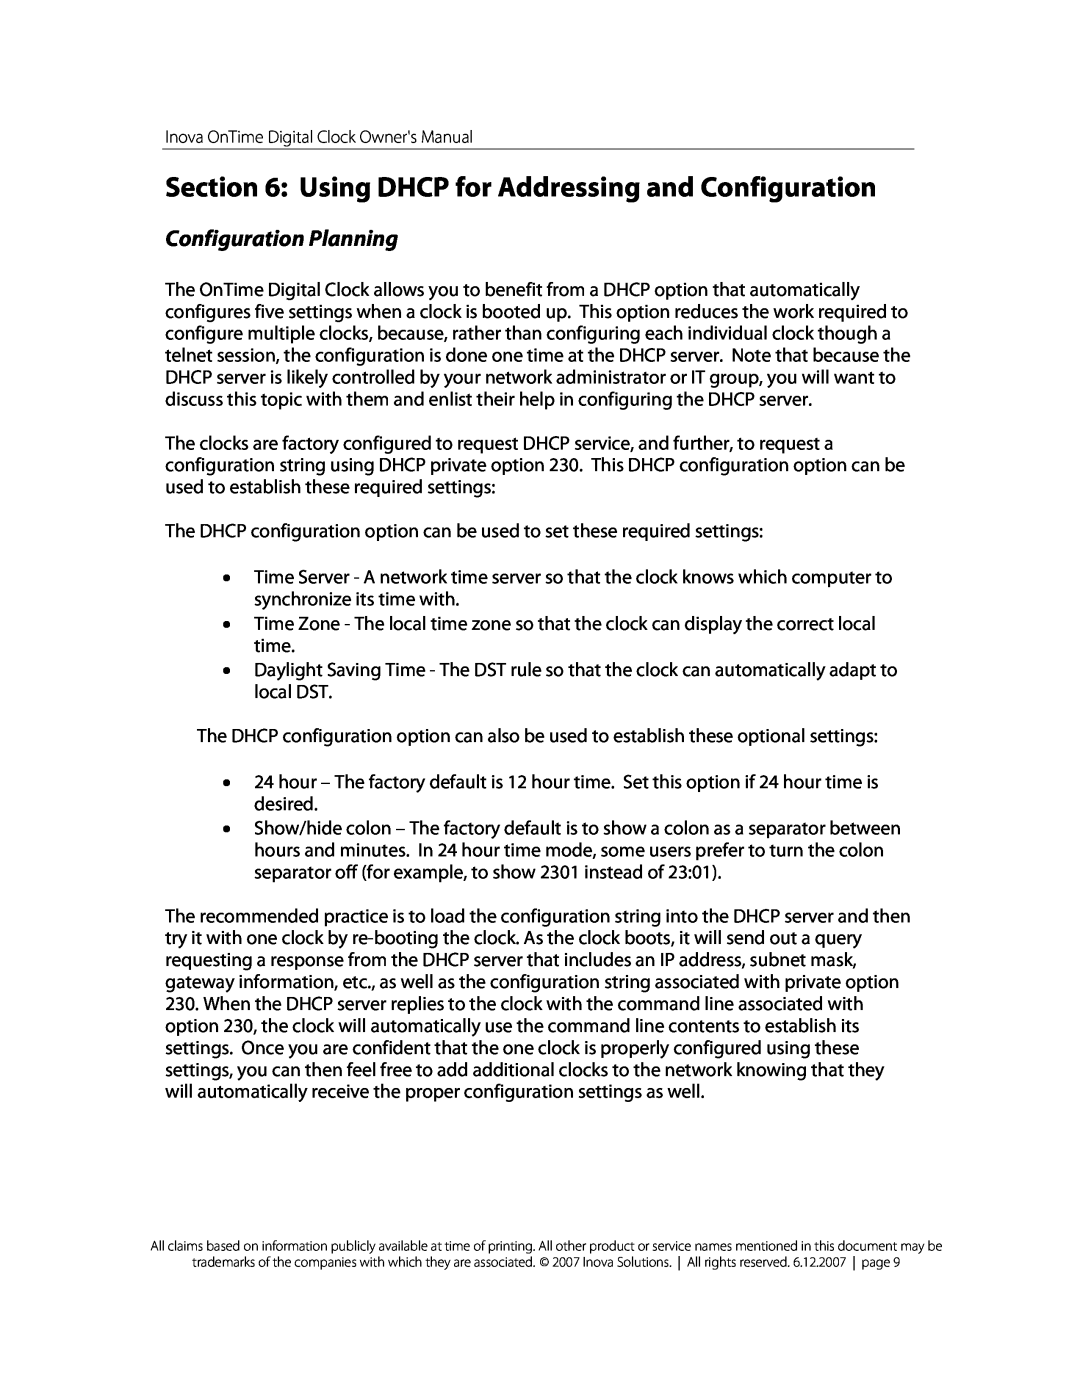 Inova OnTimeTM owner manual Using DHCP for Addressing and Configuration, Configuration Planning 